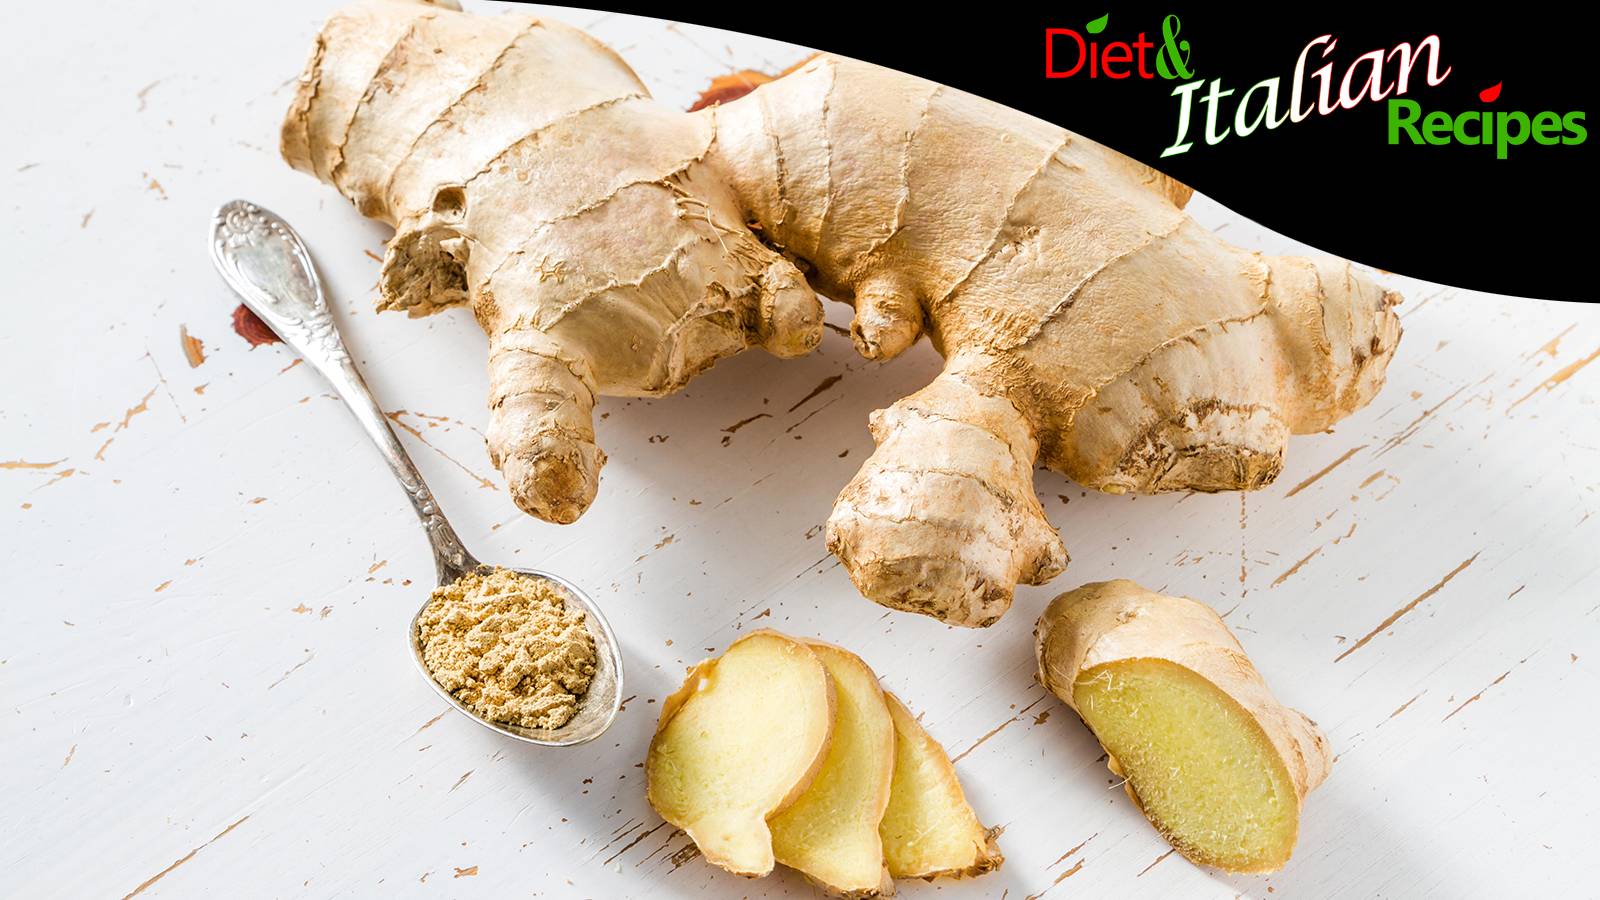 ginger properties and benefits